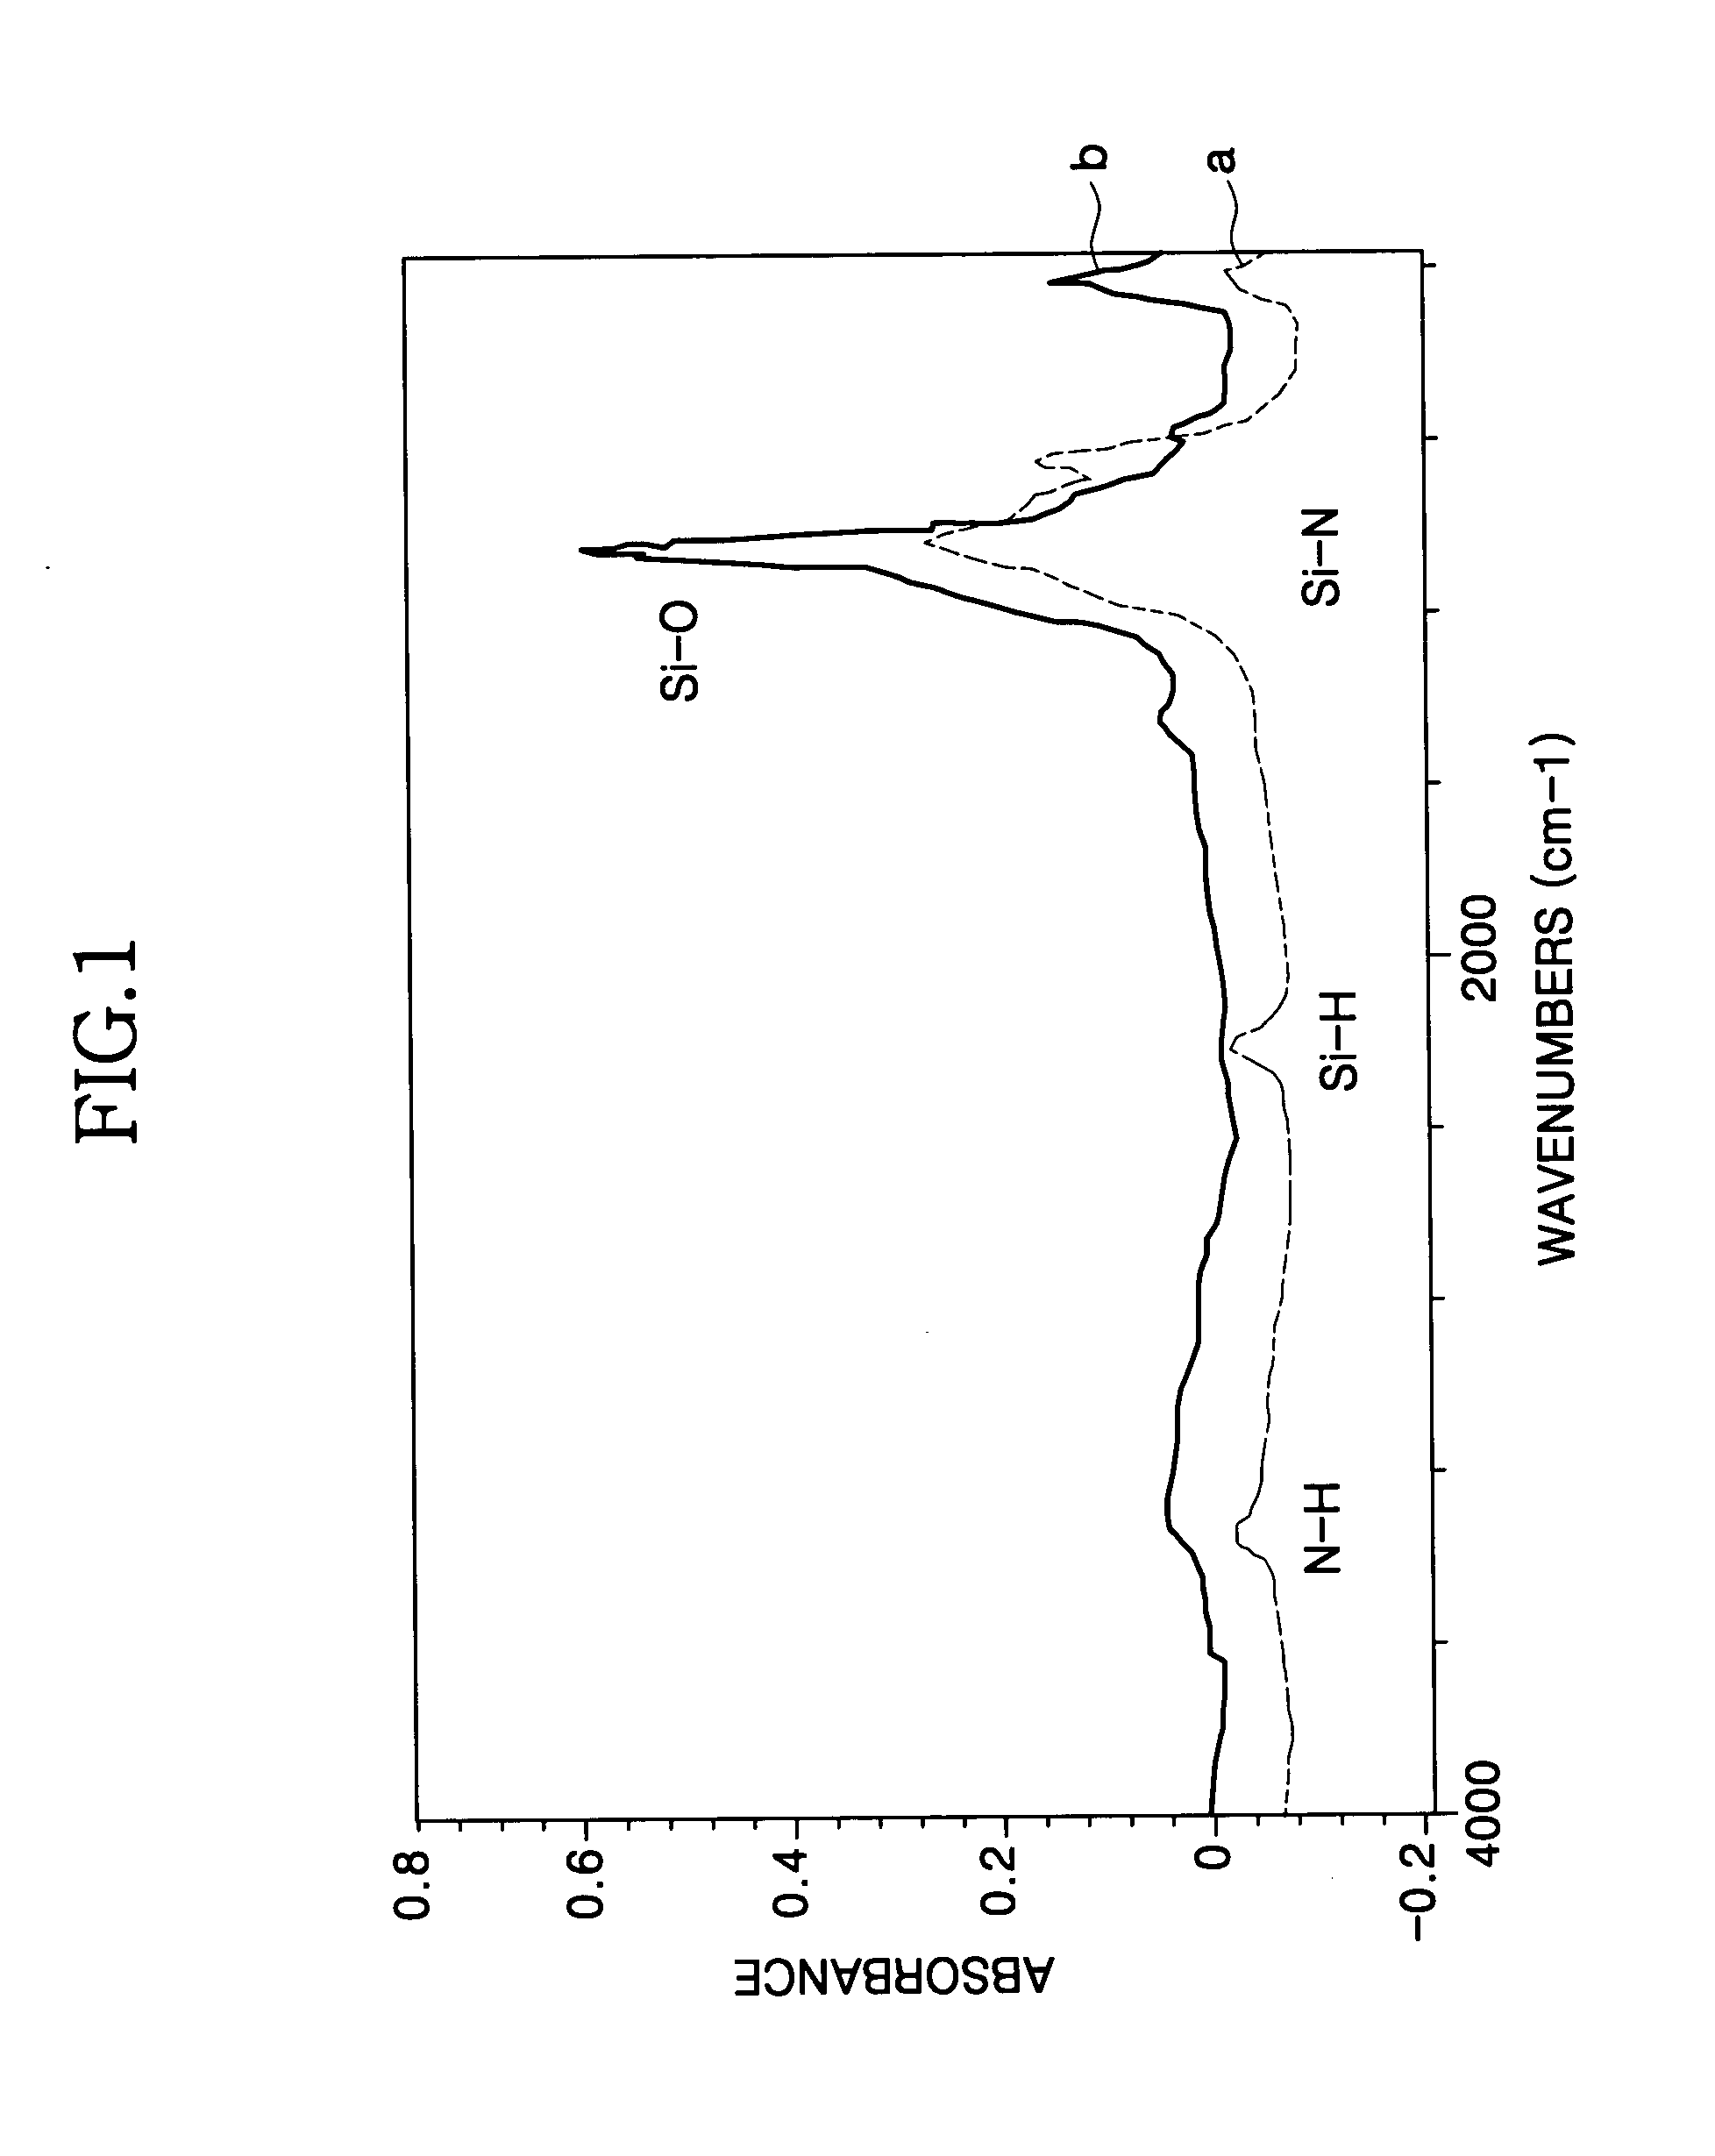 Method for forming a silicon oxide layer using spin-on glass